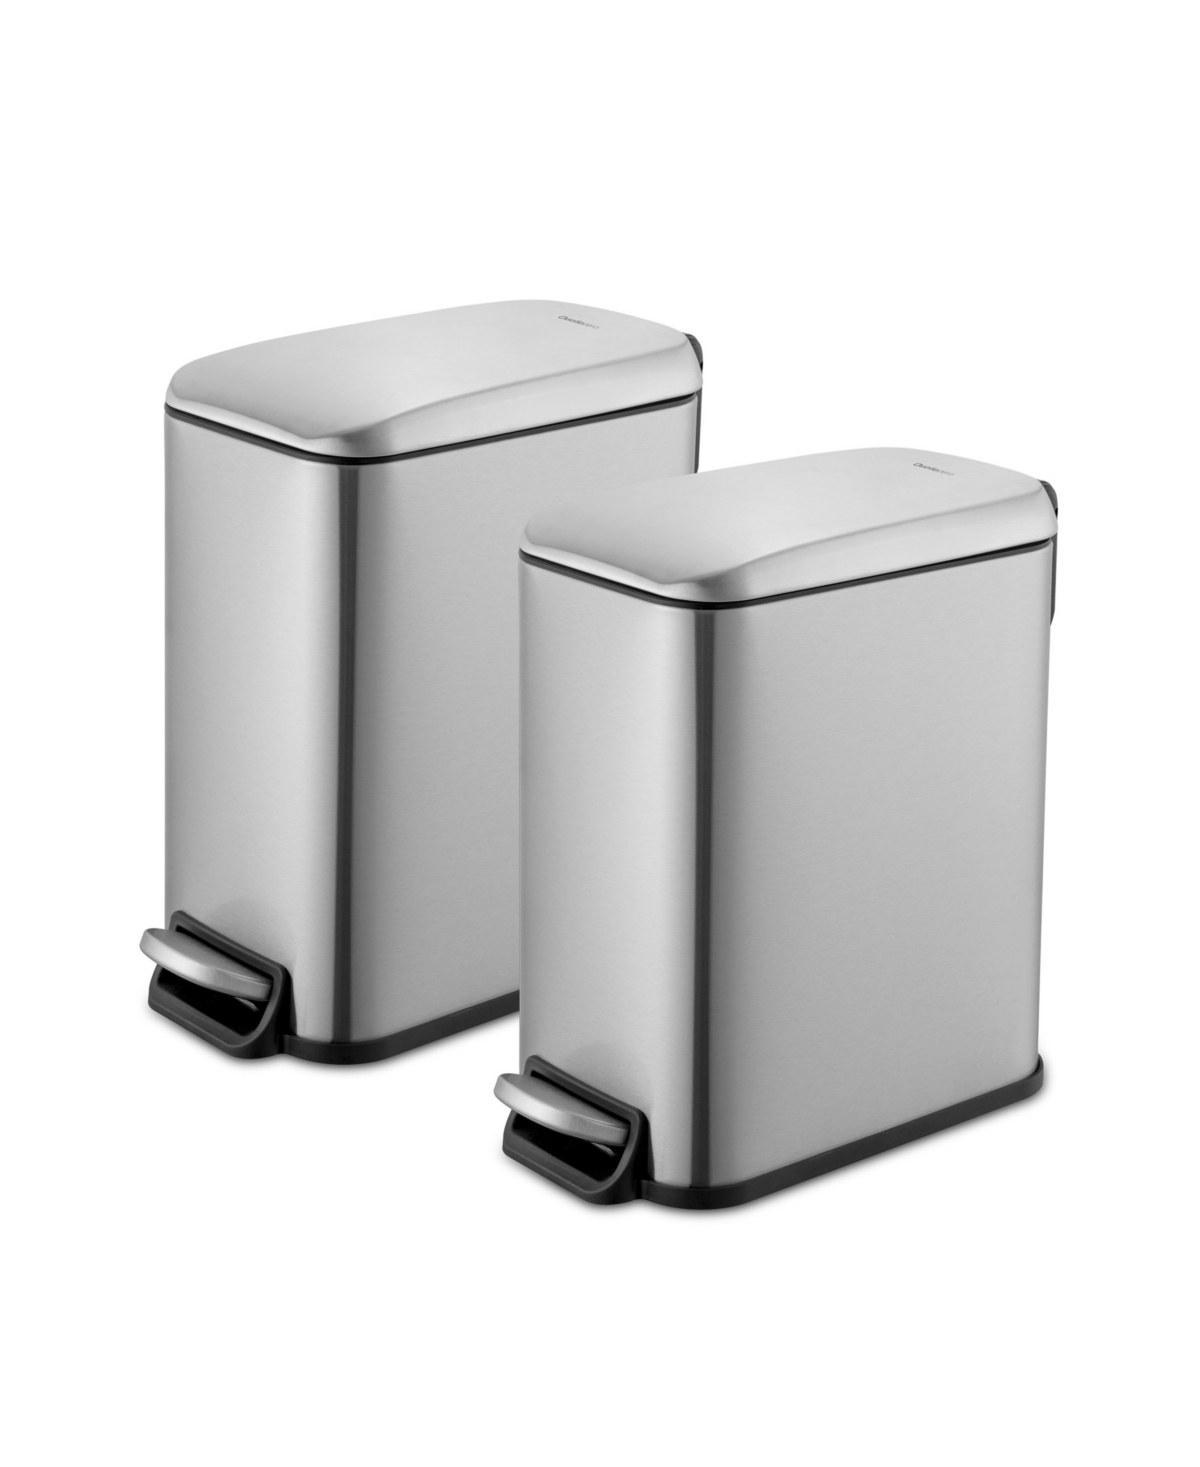 Two 1.3 Gallon Slim Step On Trash Can Set, 2 Pieces, Stainless Steel, Twin Pack - Silver